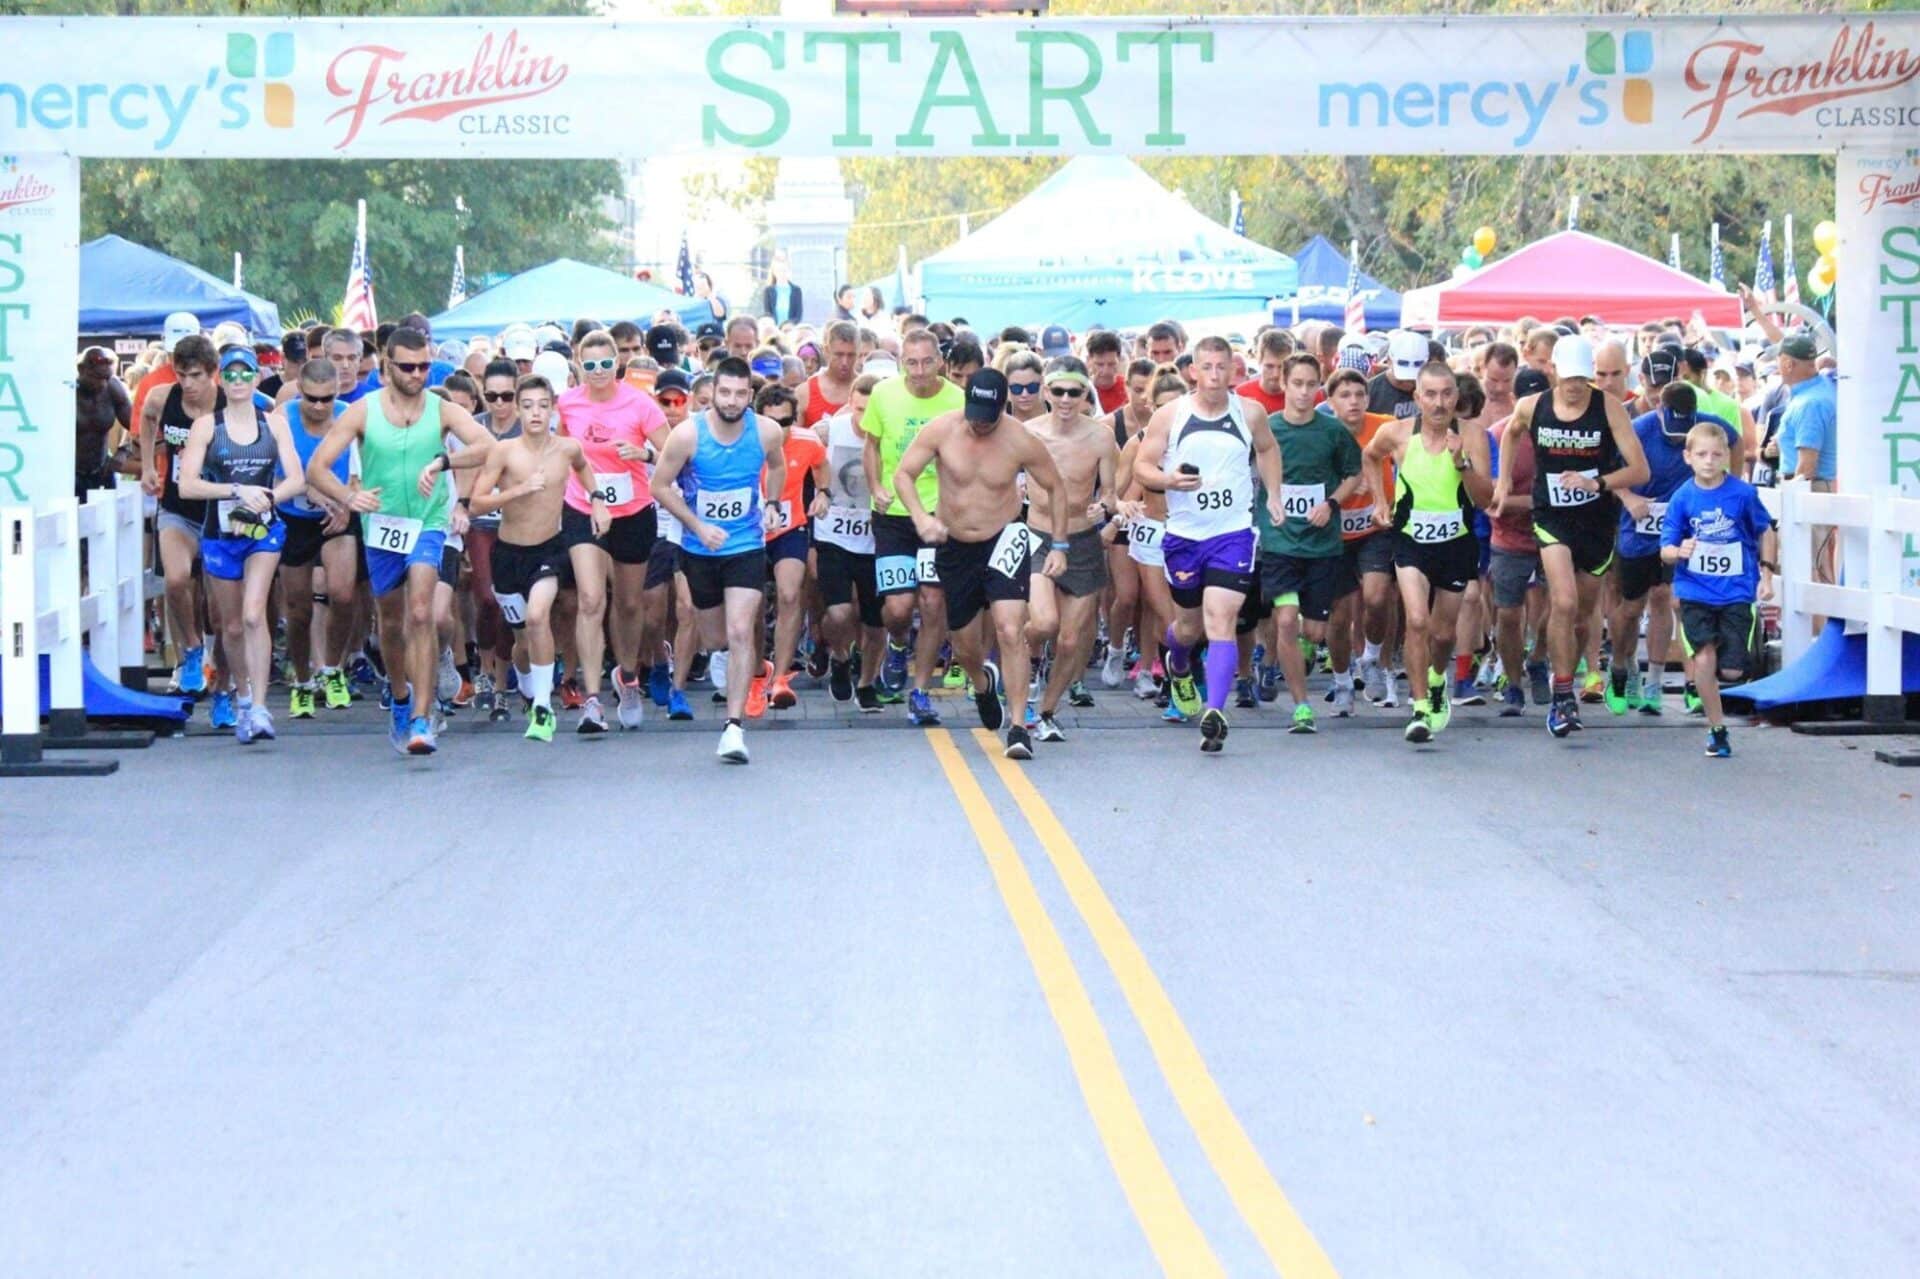 Start of the race, Franklin Classic race in Downtown Franklin Tennessee